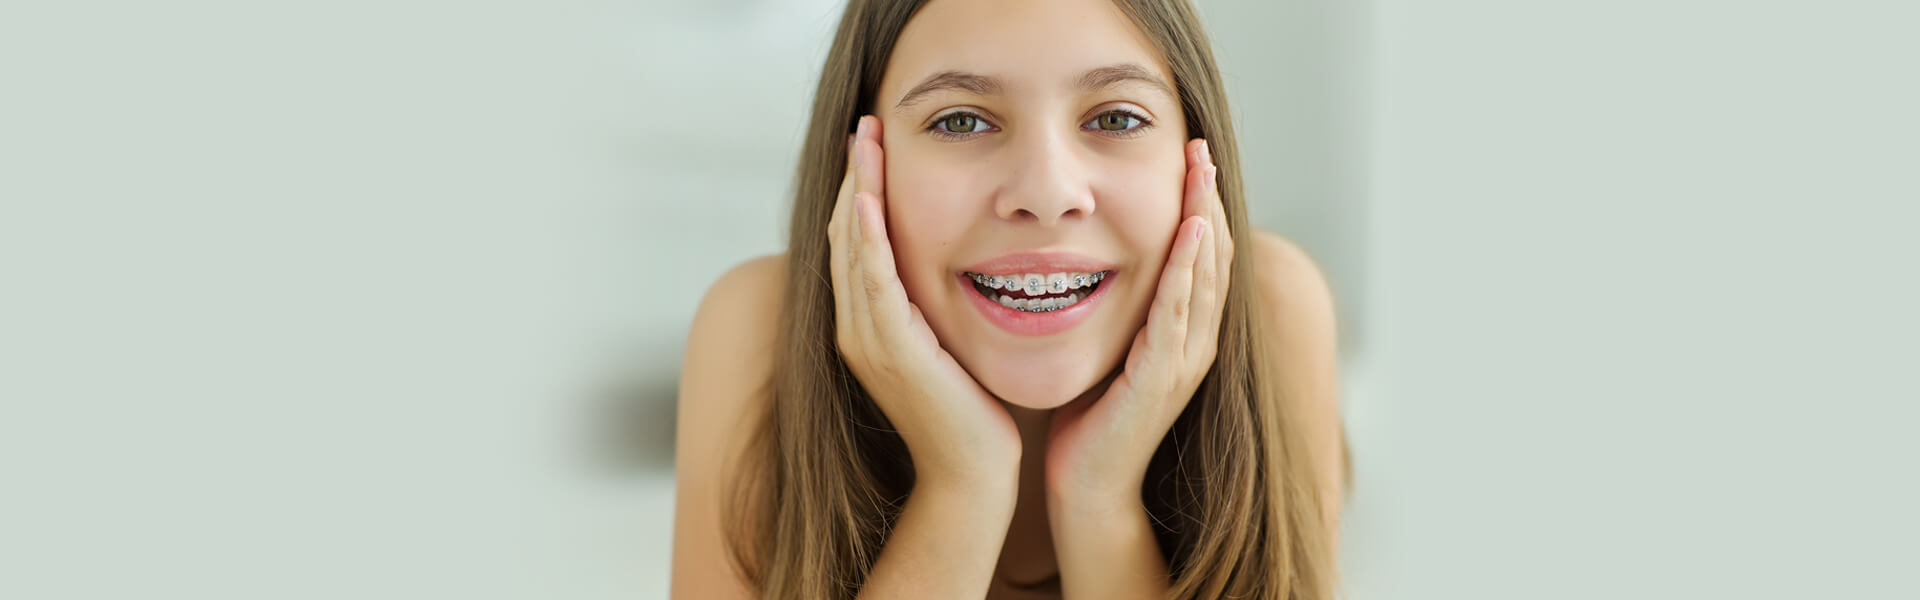 Orthodontic Treatment with Invisalign Encouraging Patients to Straighten Teeth